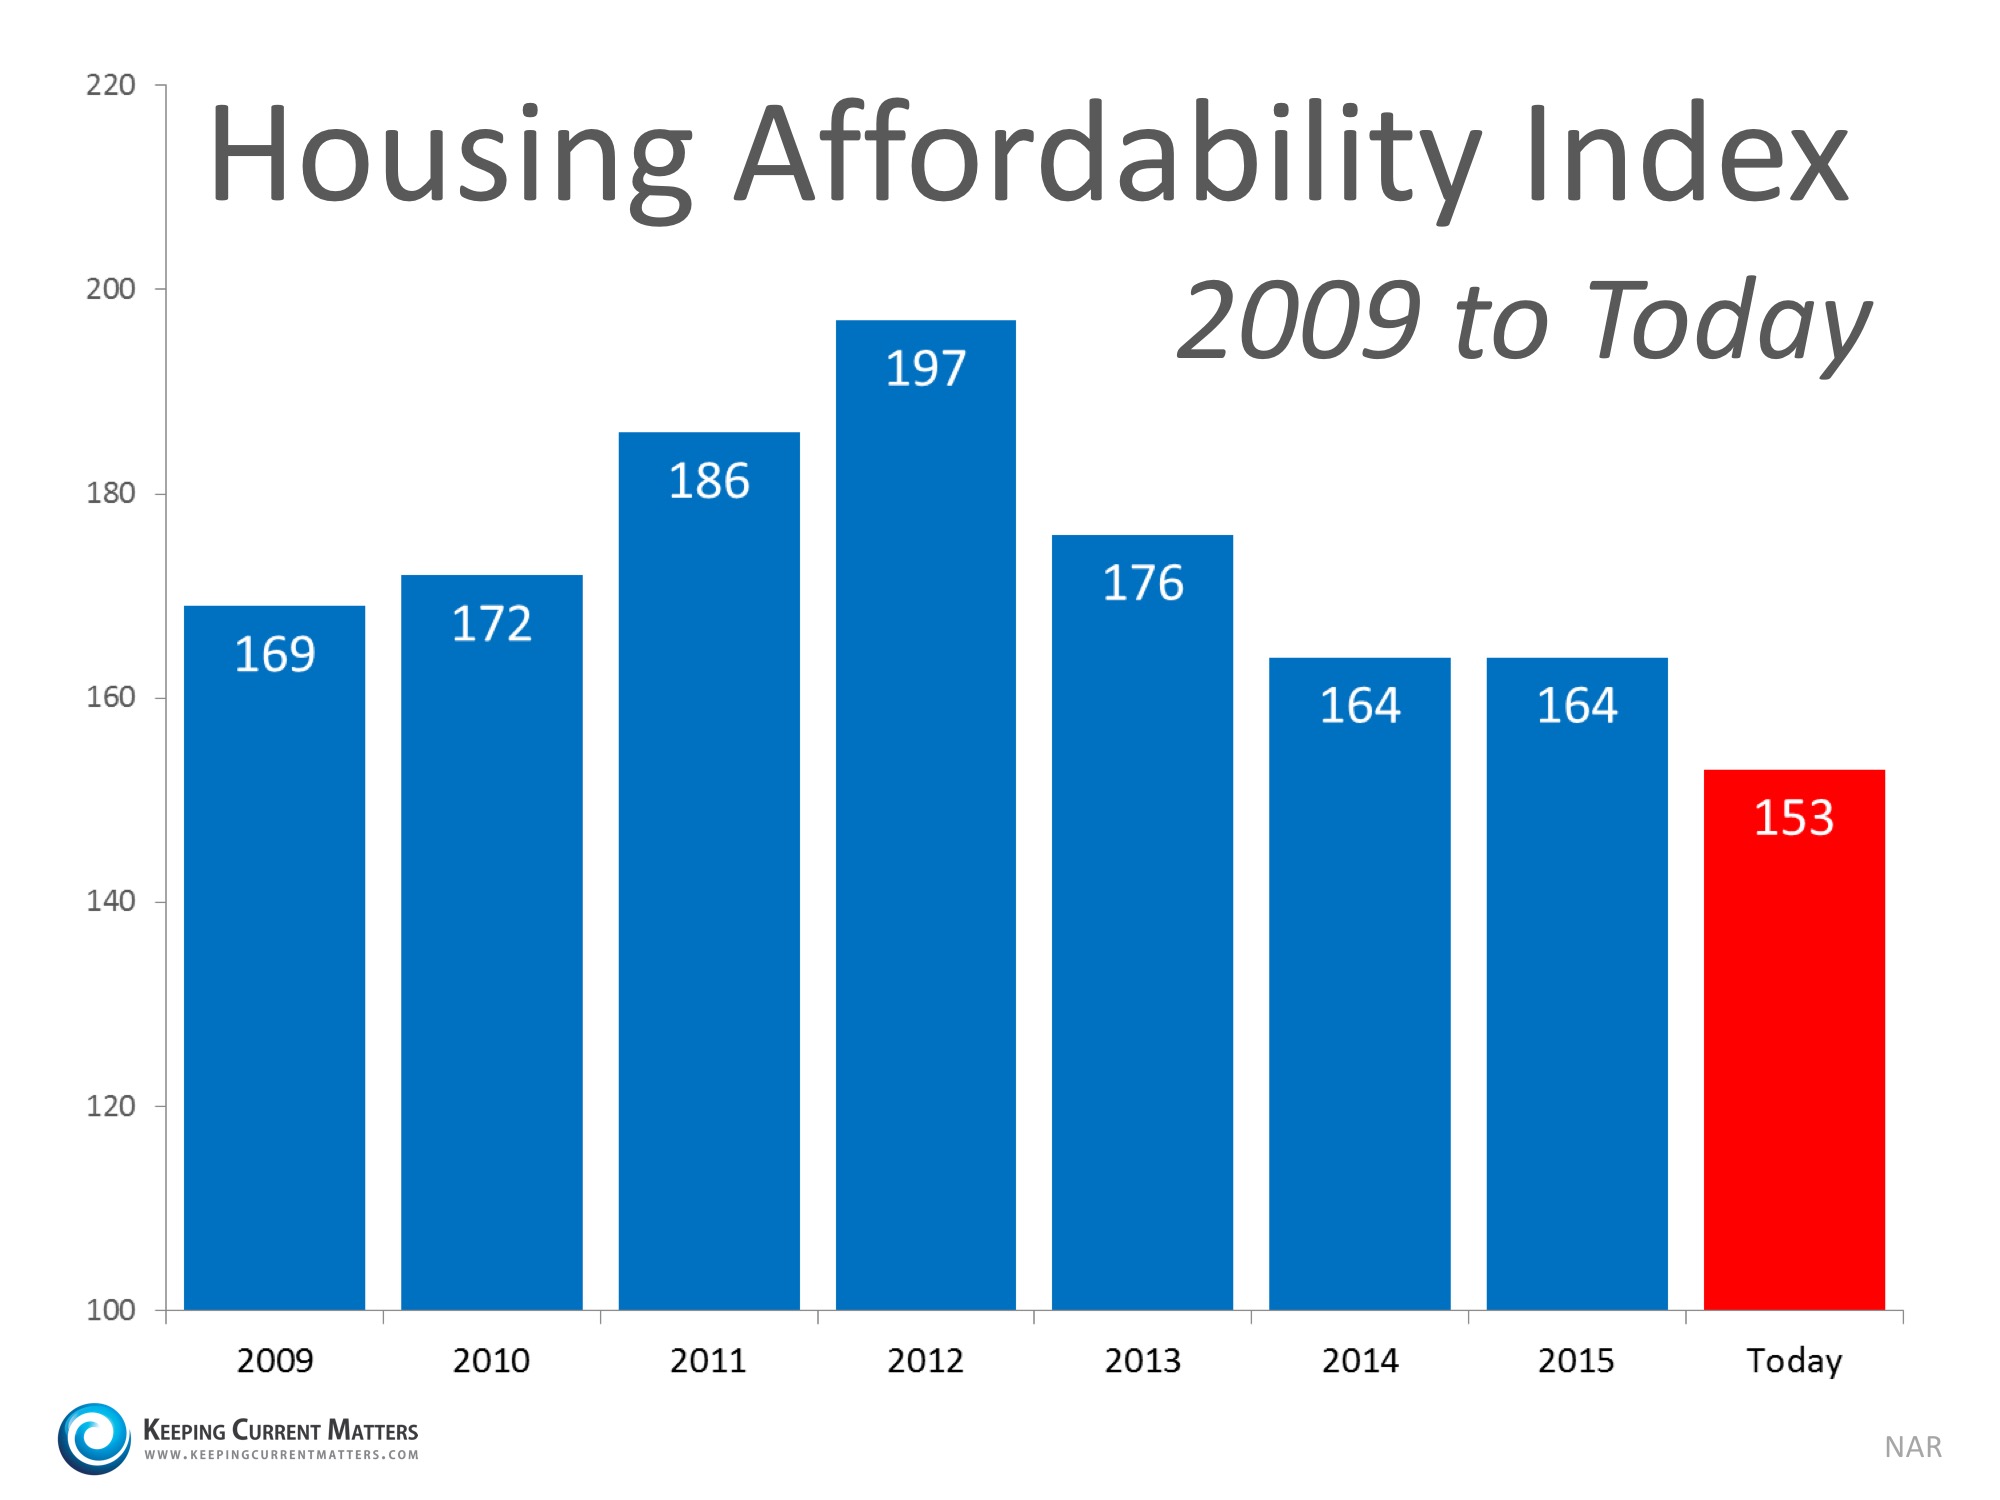 How Scary is the Housing Affordability Index? | Keeping Current Matters